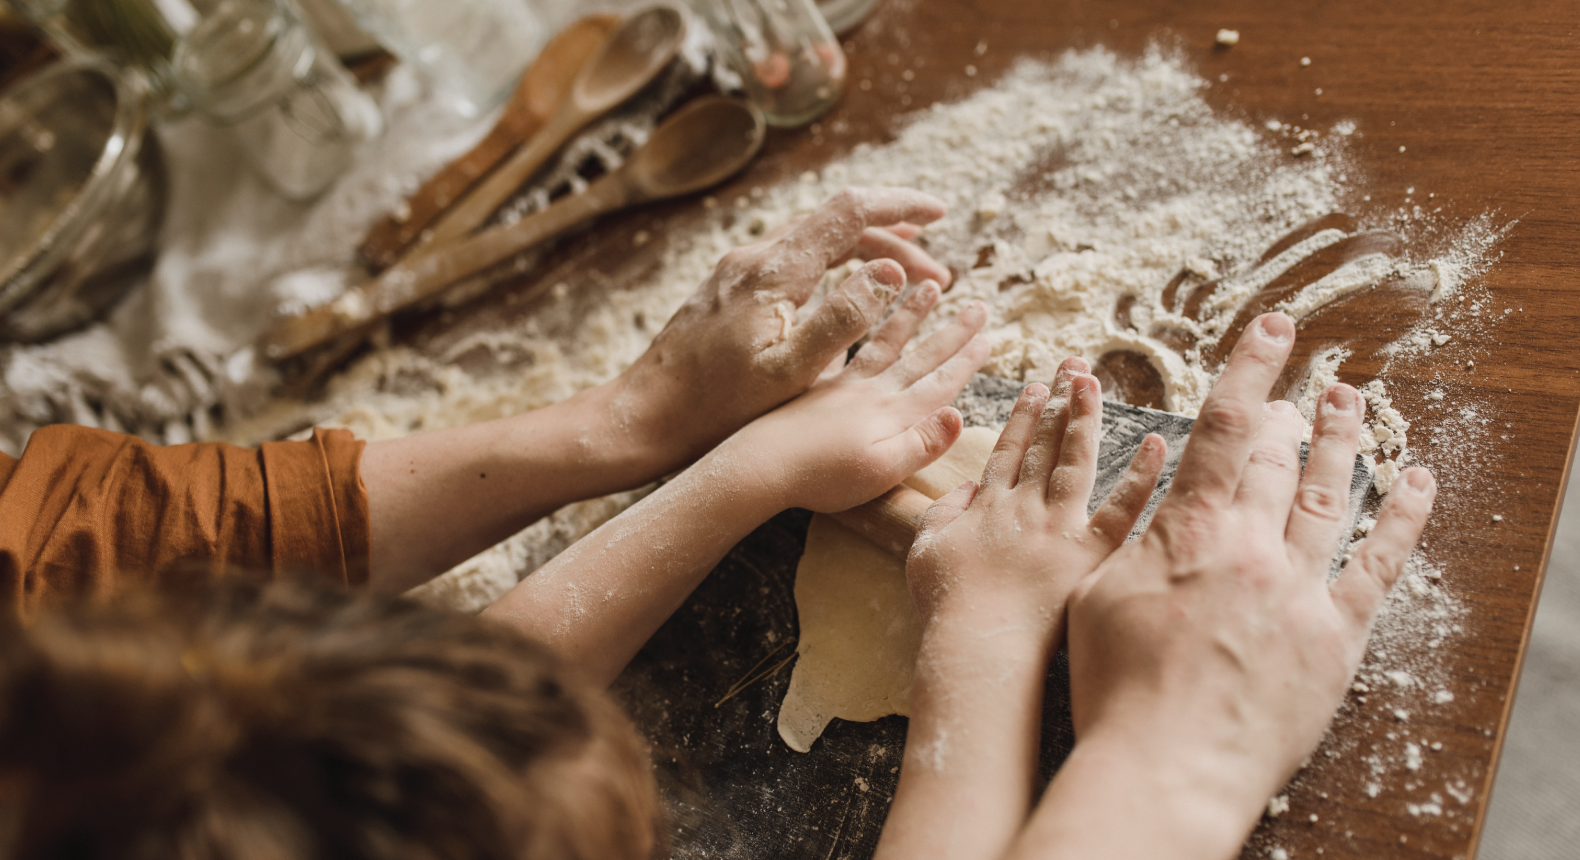 A child and caregiver patting dough on countertop